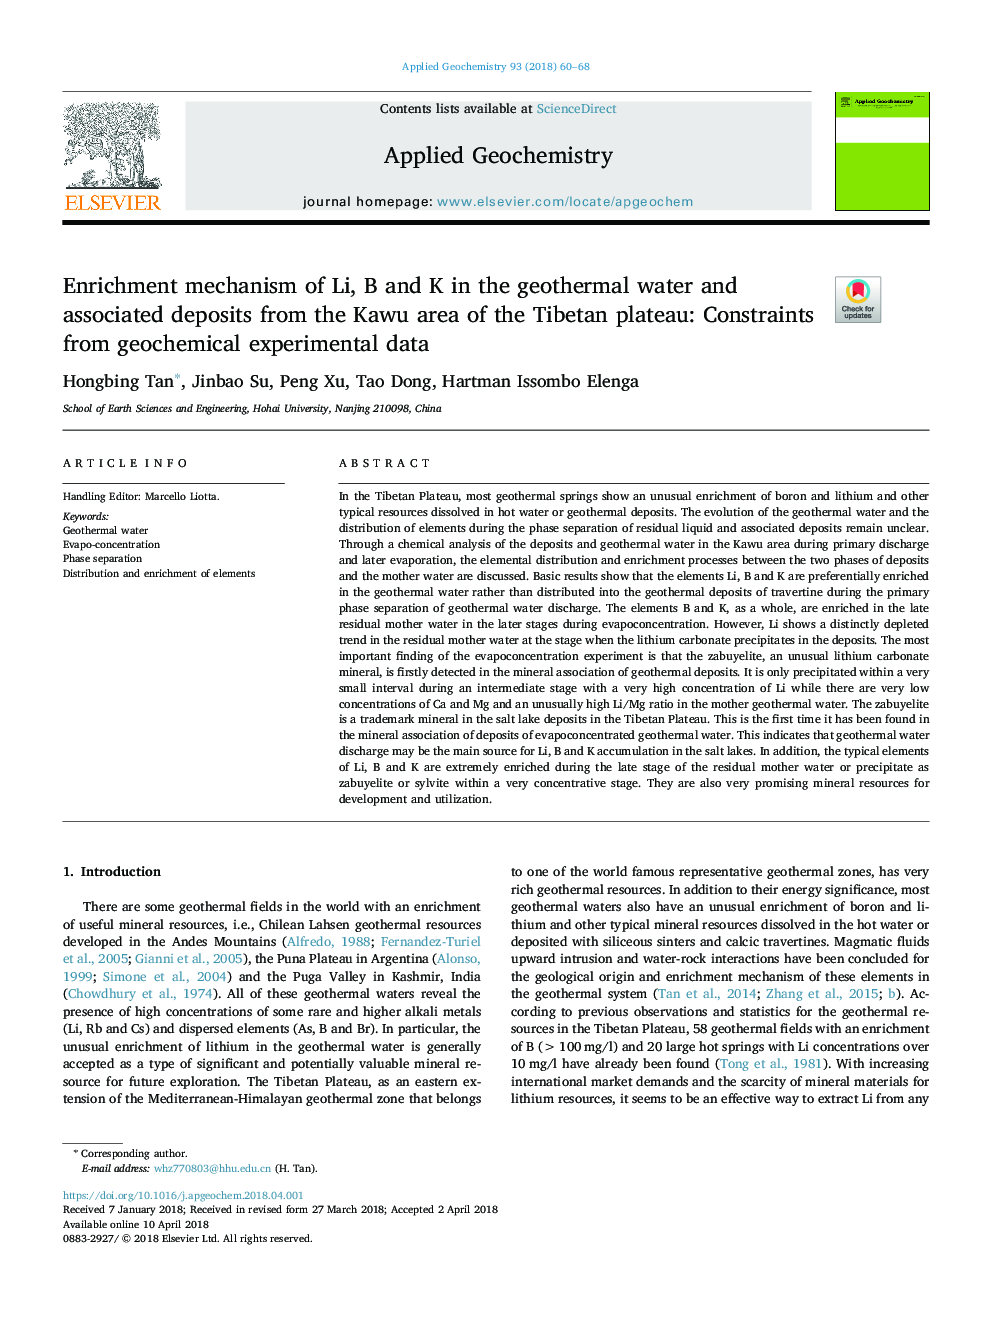 Enrichment mechanism of Li, B and K in the geothermal water and associated deposits from the Kawu area of the Tibetan plateau: Constraints from geochemical experimental data